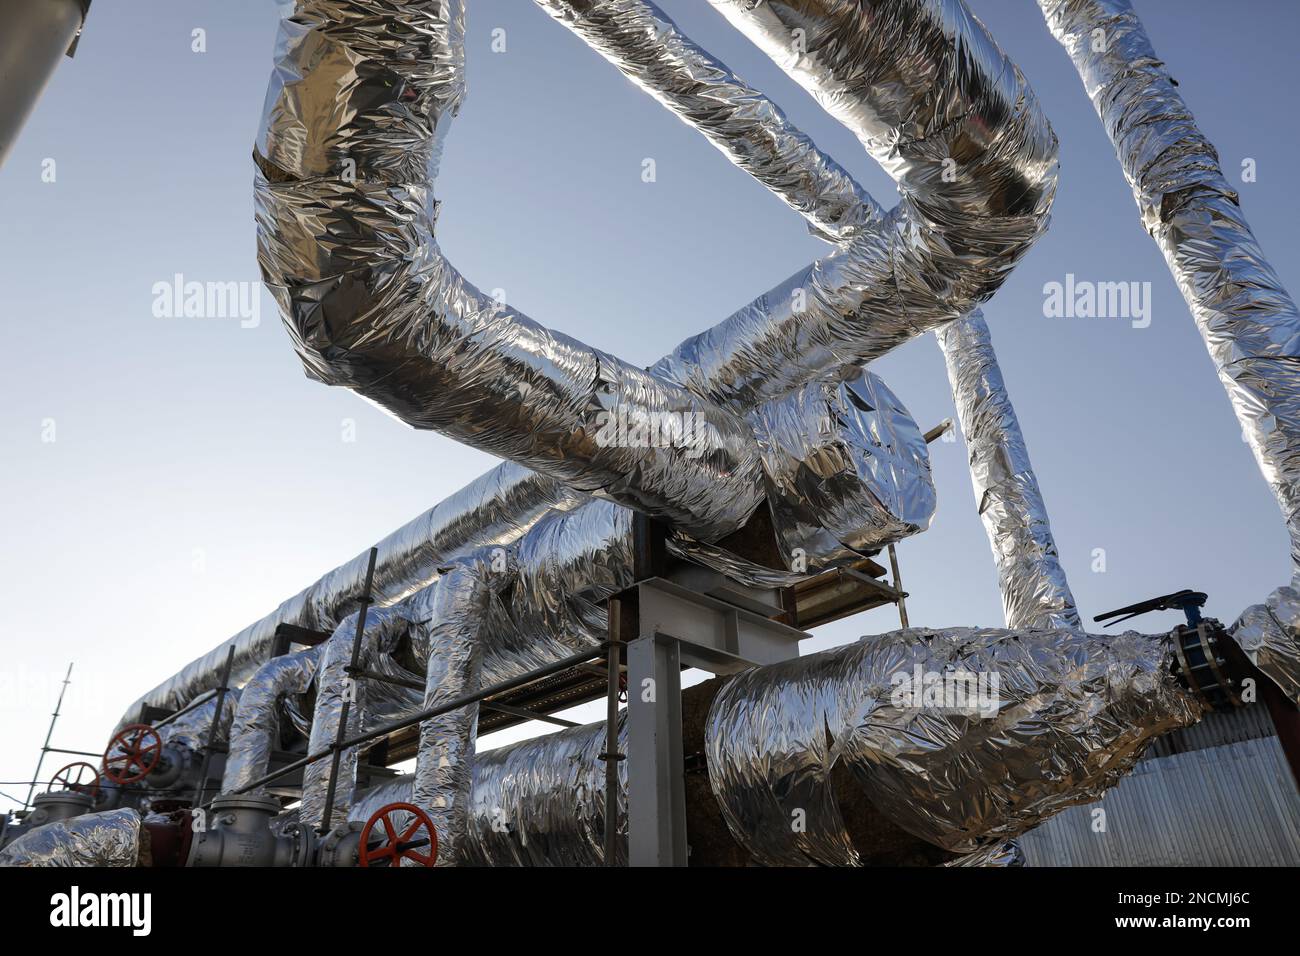 Details with industrial metallic pipelines covered in tin foil through which hot water flows. Stock Photo